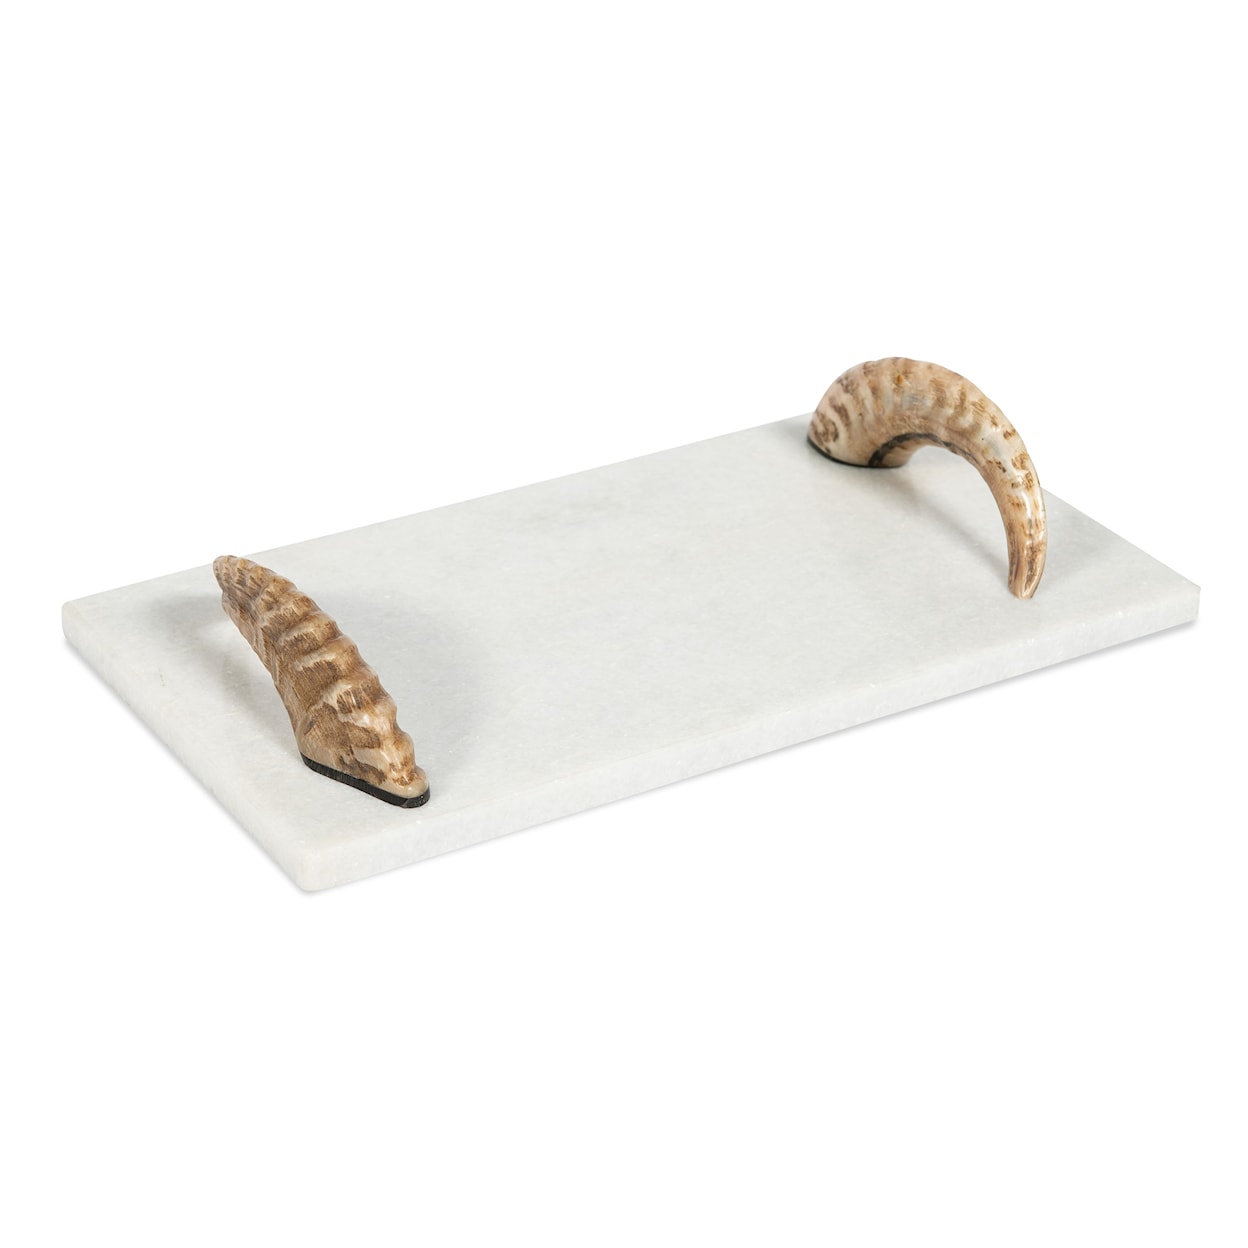 BOBO Intriguing Objects BOBO Intriguing Objects Odin White Marble Cheese Board